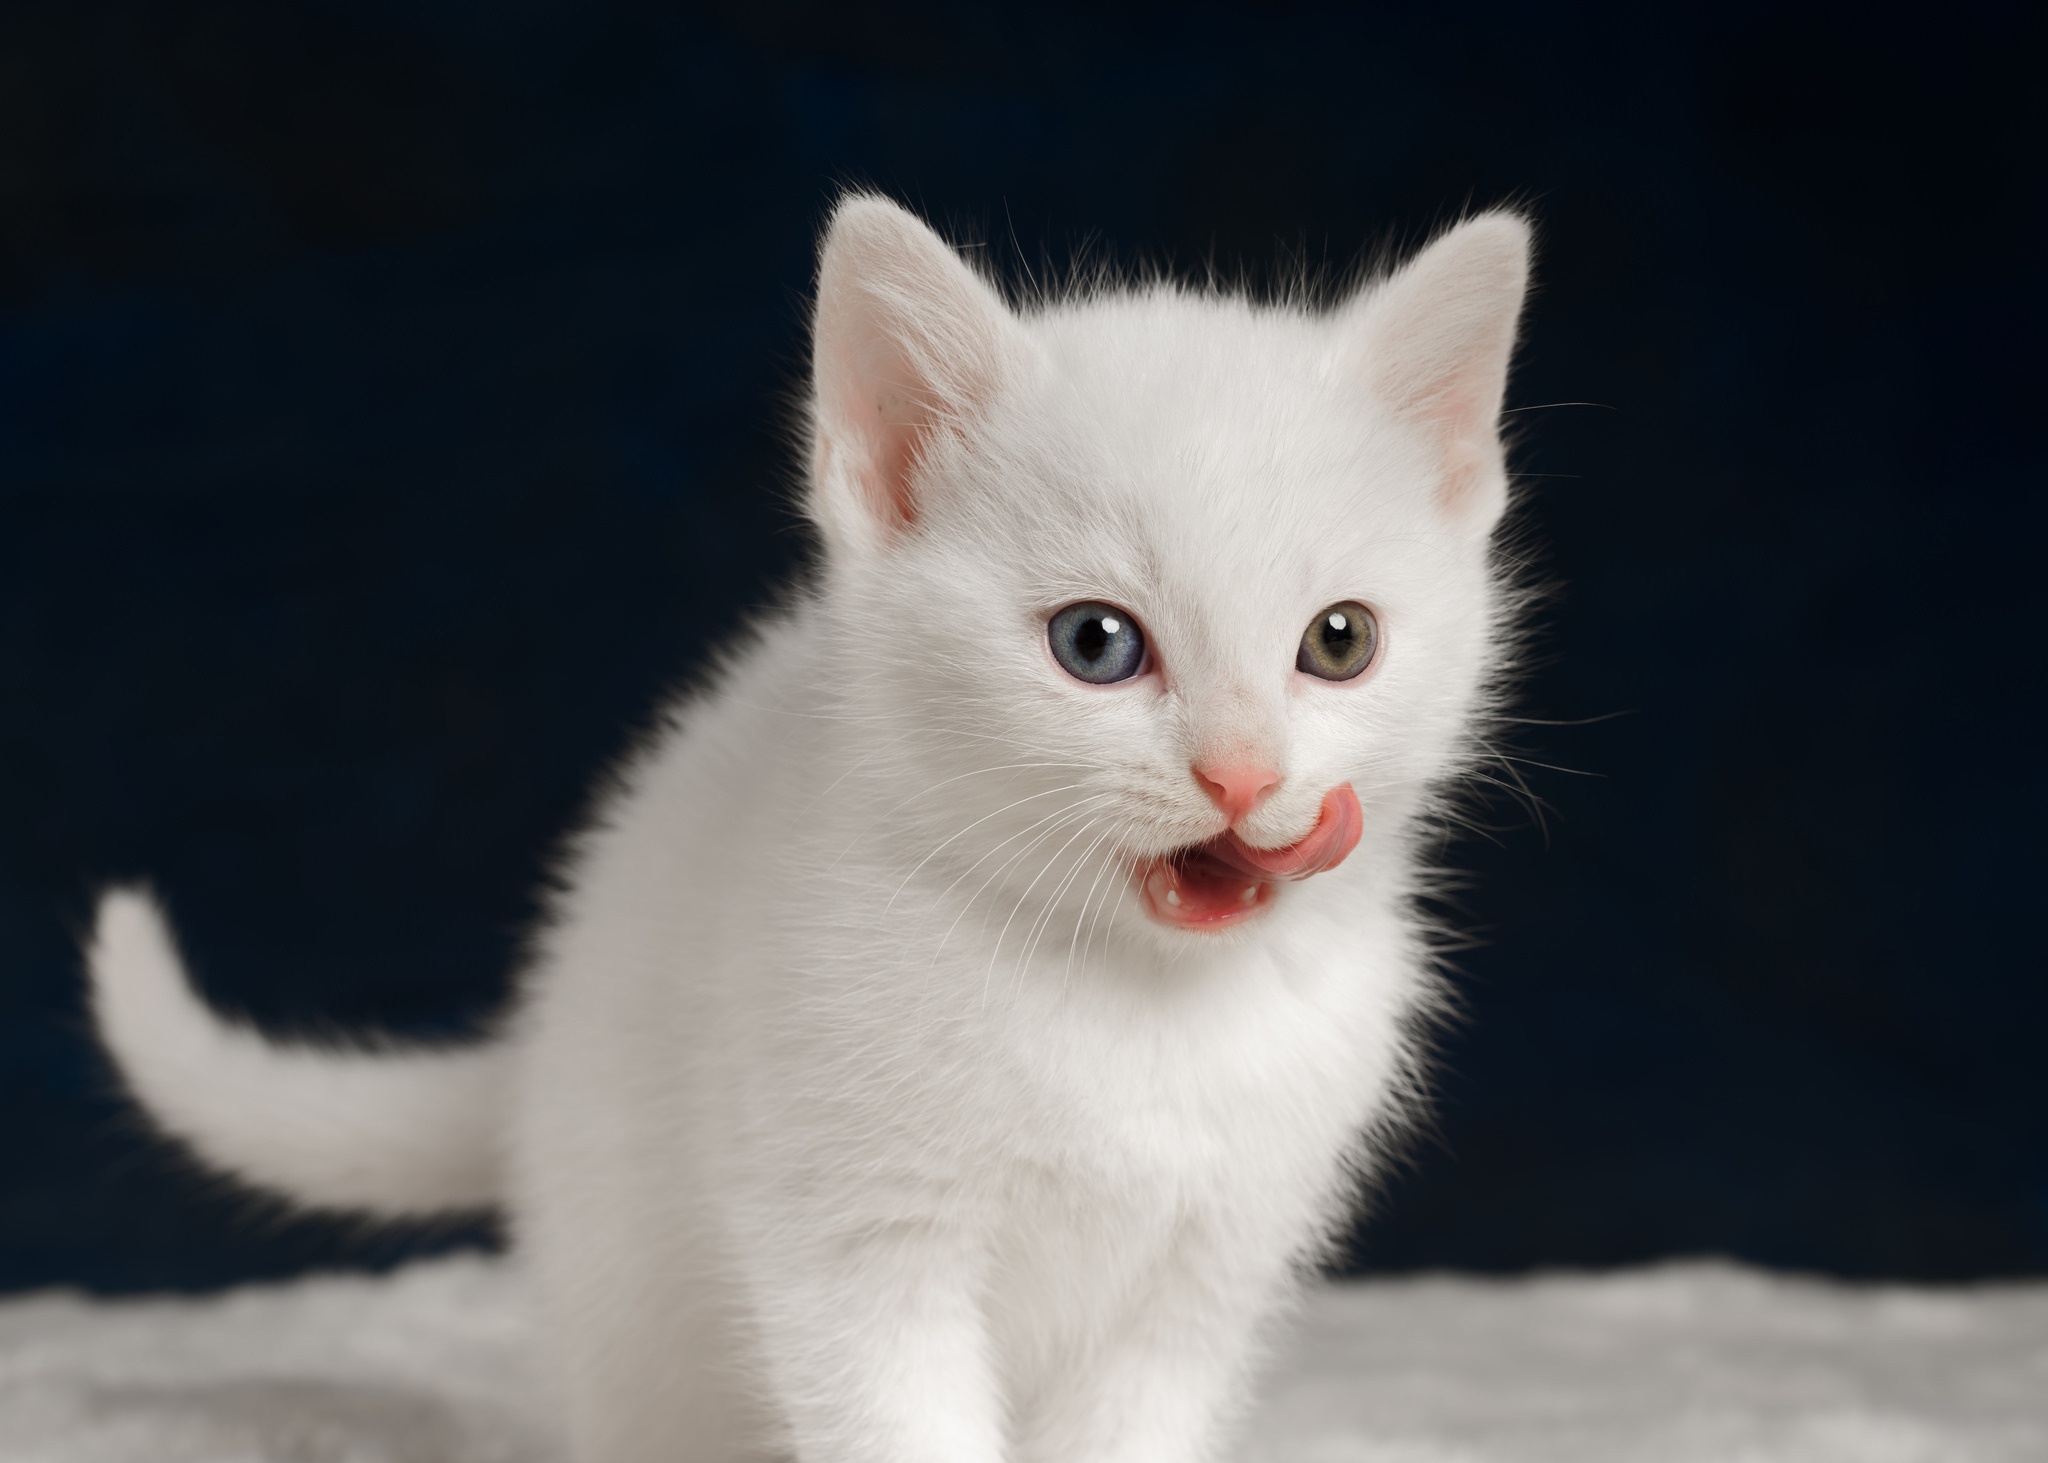 General 2048x1463 kittens white tongues animals cats baby animals tongue out heterochromia closeup